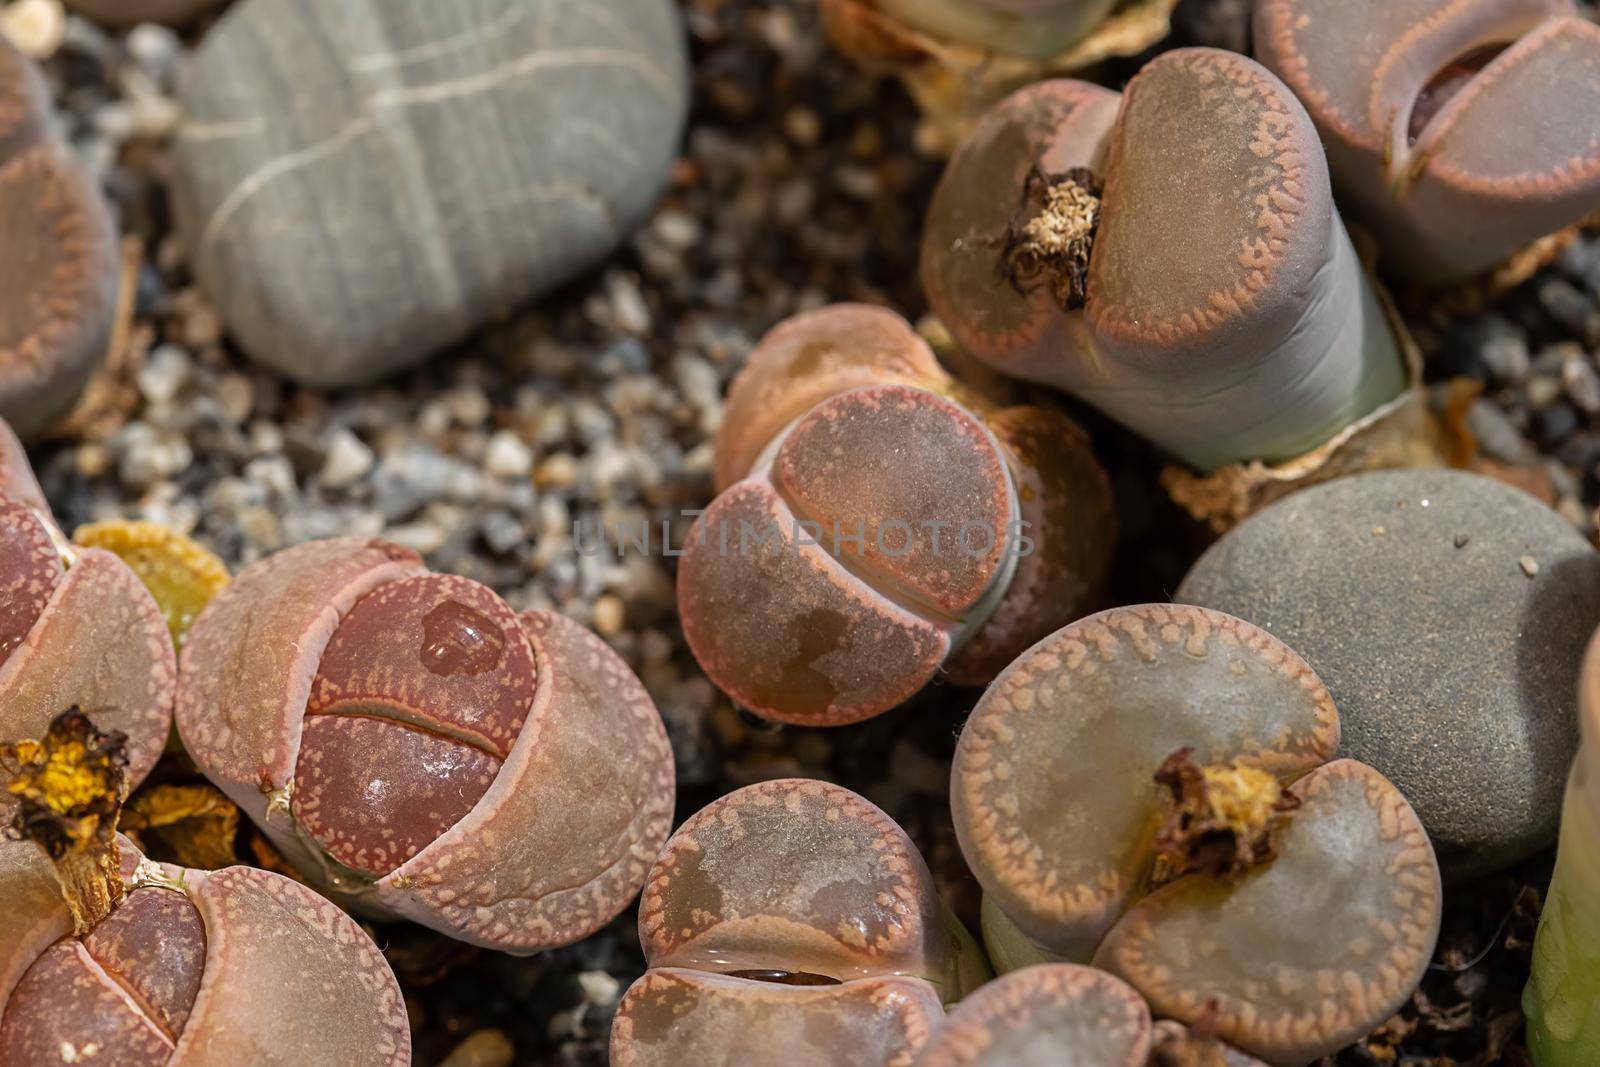 Lithops Living stone, Cactus on flower pot at the greenhouse garden by galinasharapova